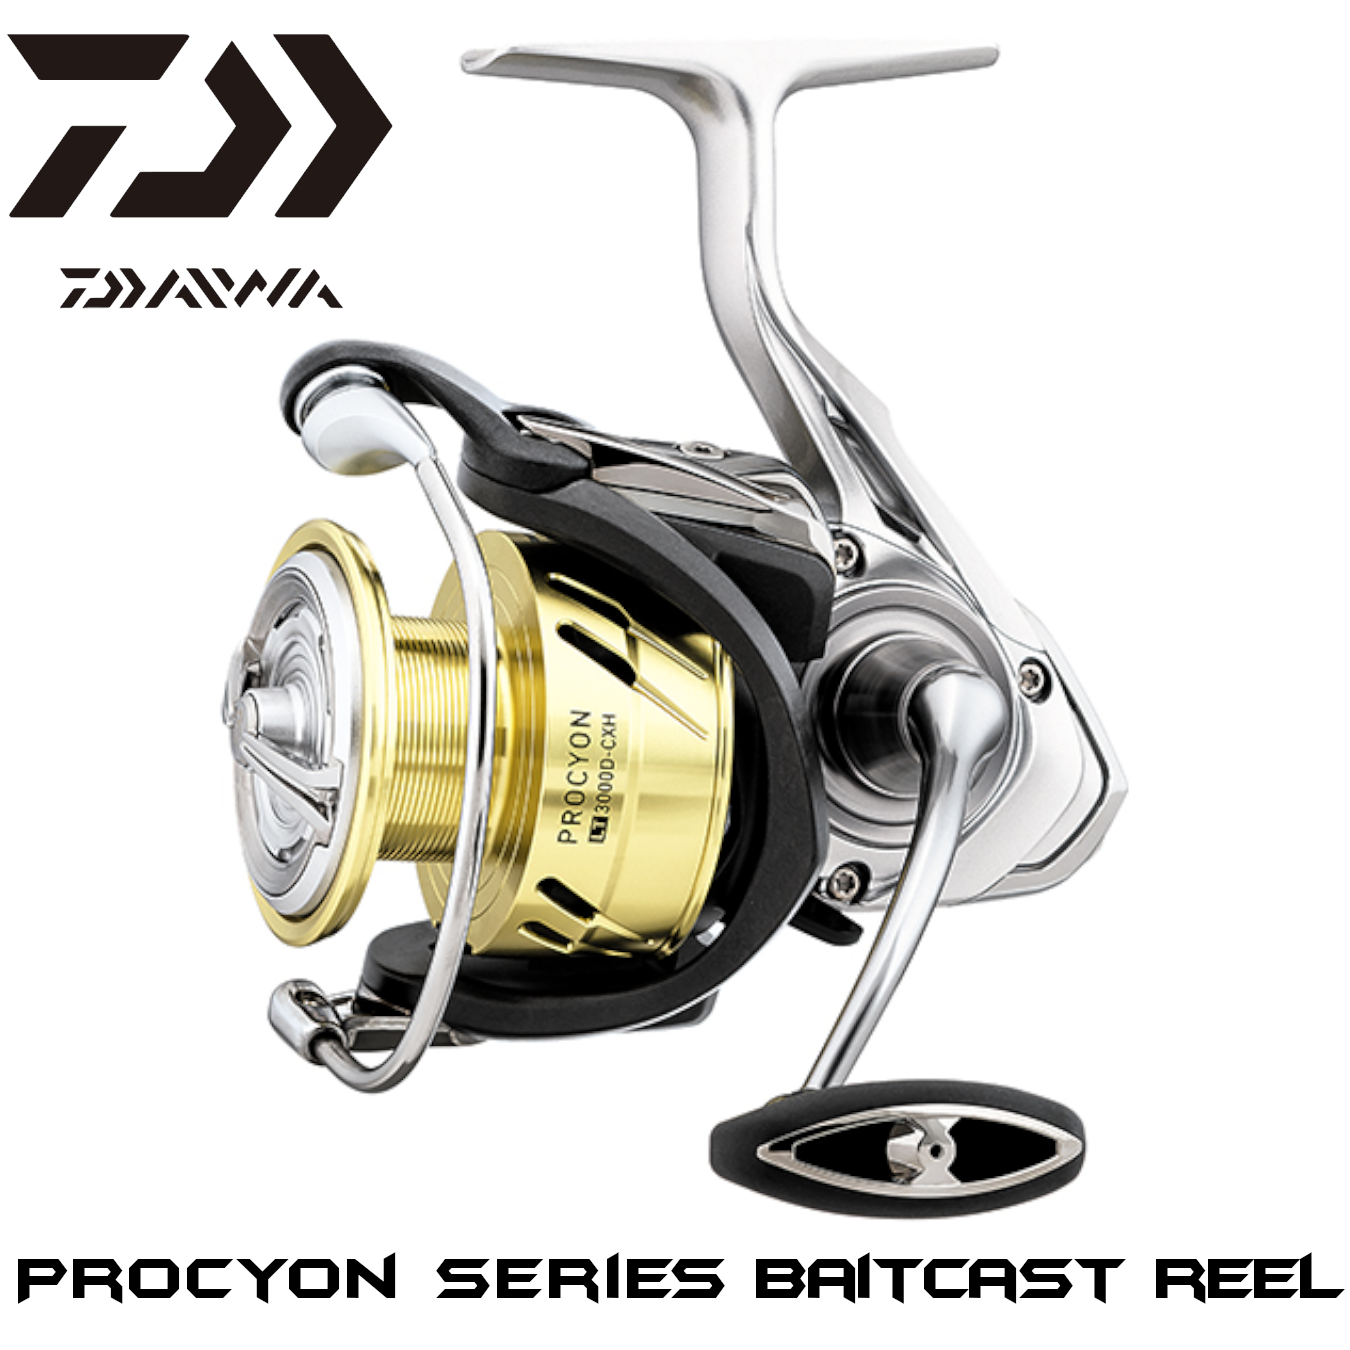 Quantum Smoke XPT Spinning Reel in Canada